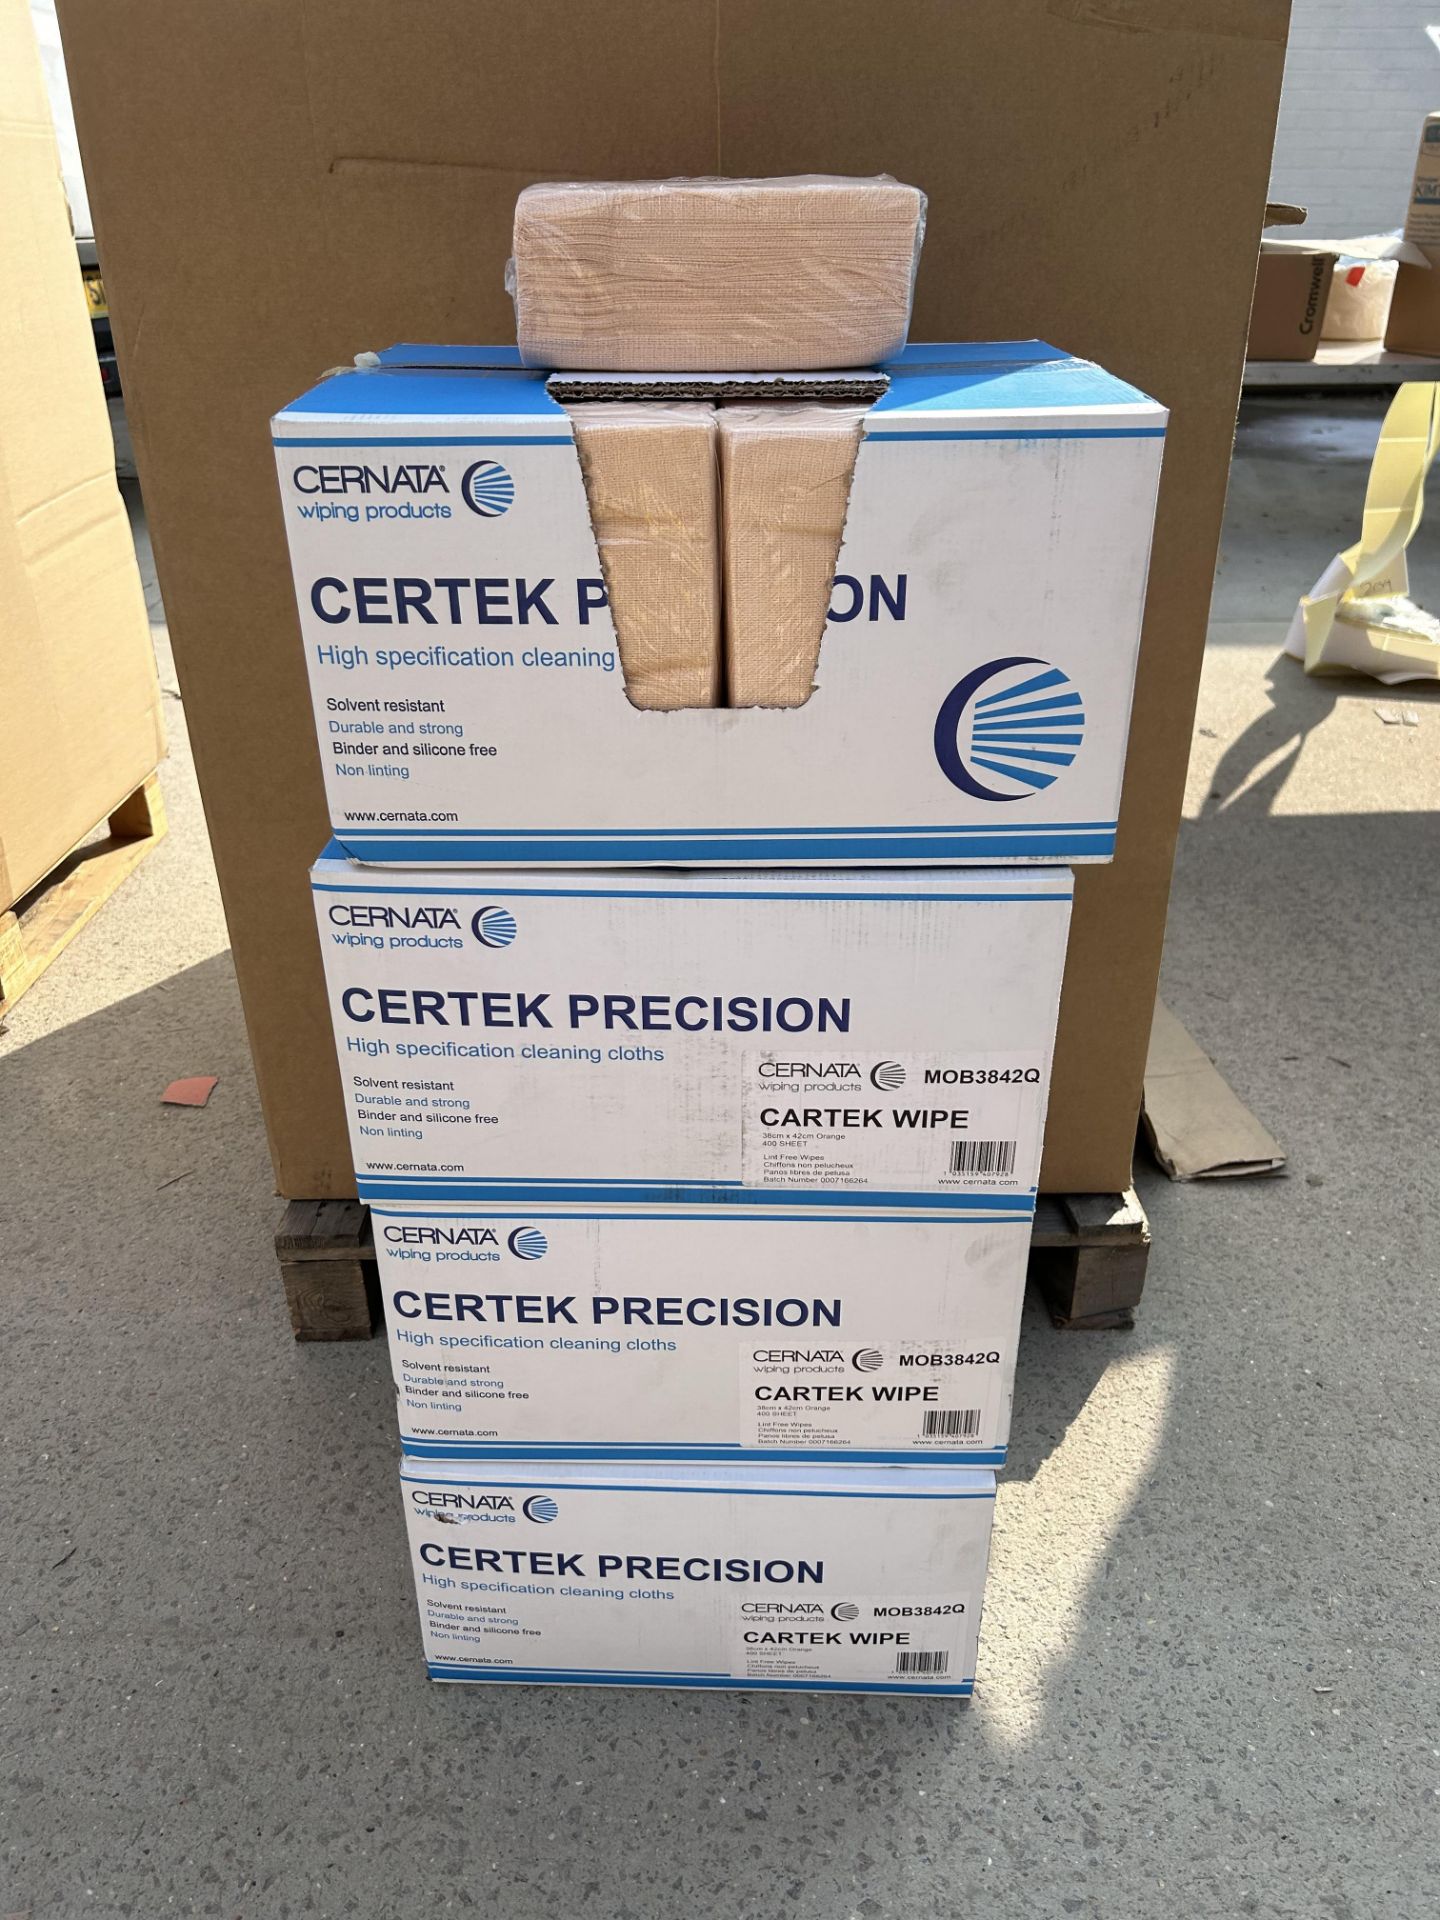 4x CTNS CERTEK PRECISION HIGH SPEC CLEANING JANITORIAL CLOTHS BRAND NEW